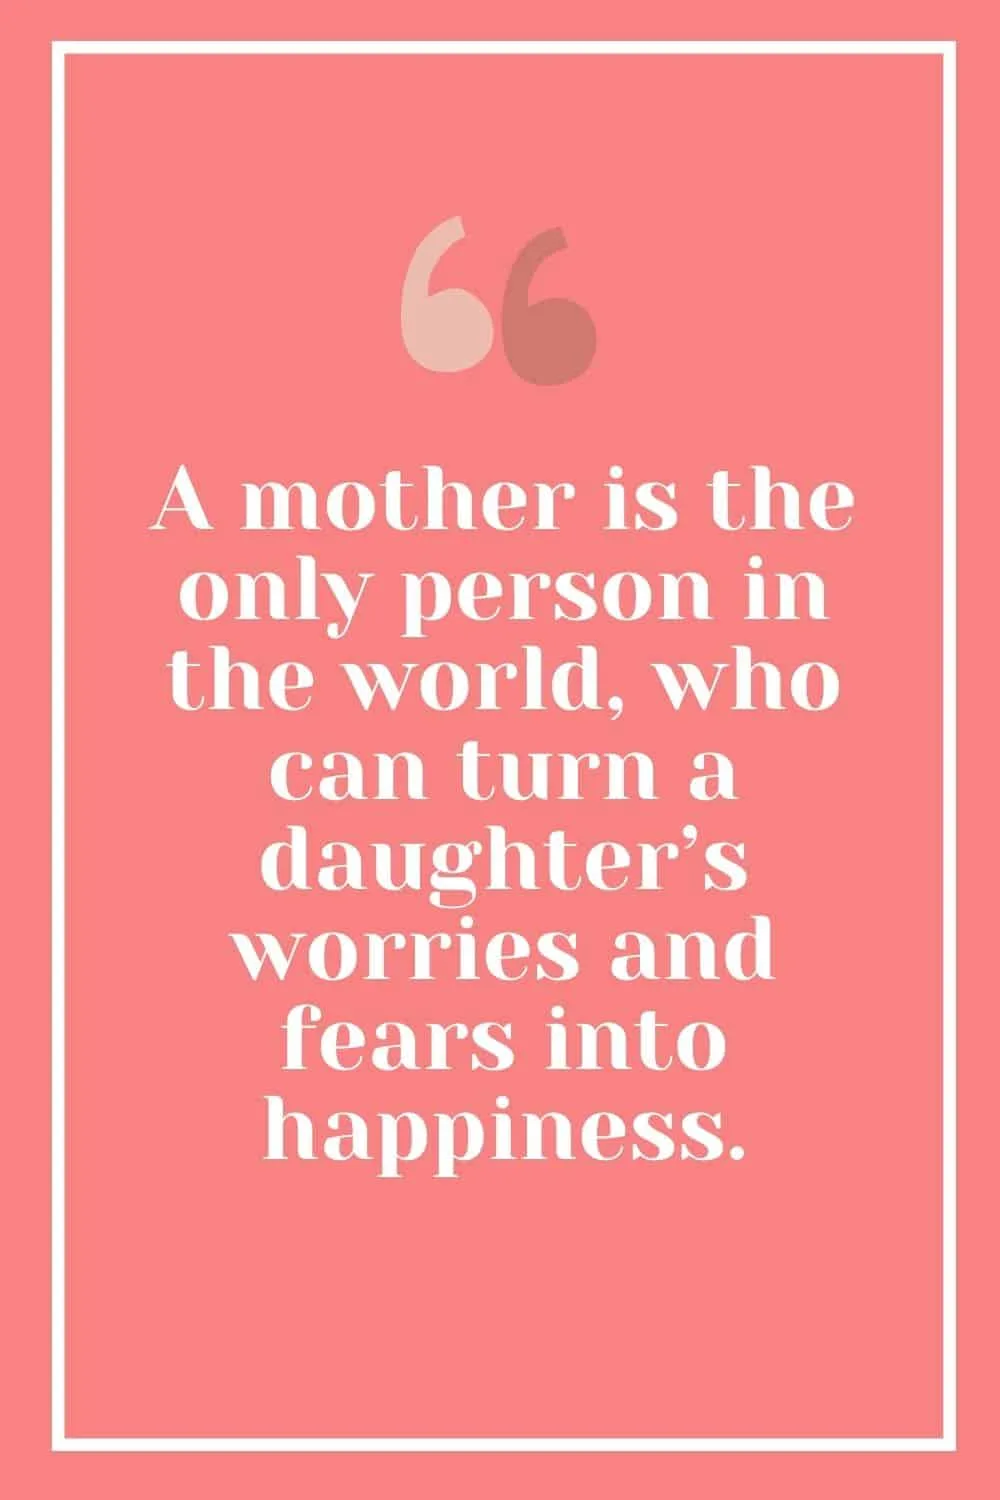 Beautiful uplifting mother and daughter quote 